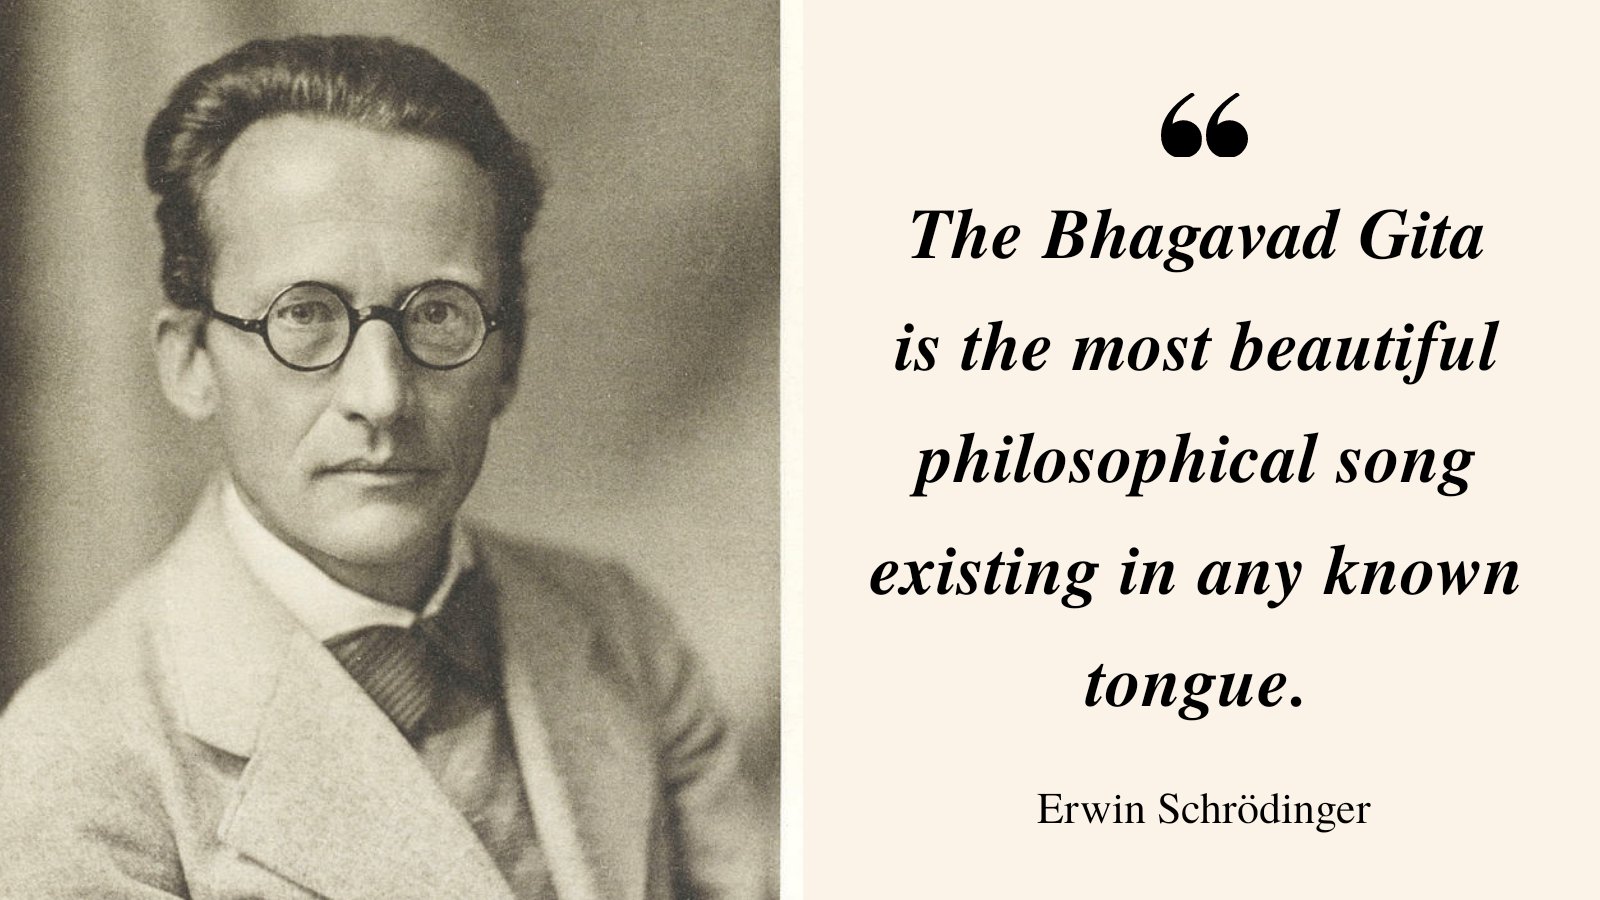 Bhakti Today Schrödinger Nobel Prize Winning Austrian Irish Physicist Who Developed A Number Of Fundamental Results In Quantum Theory Once Also Said “Most Of My Ideas & Theories Are Heavily Influenced